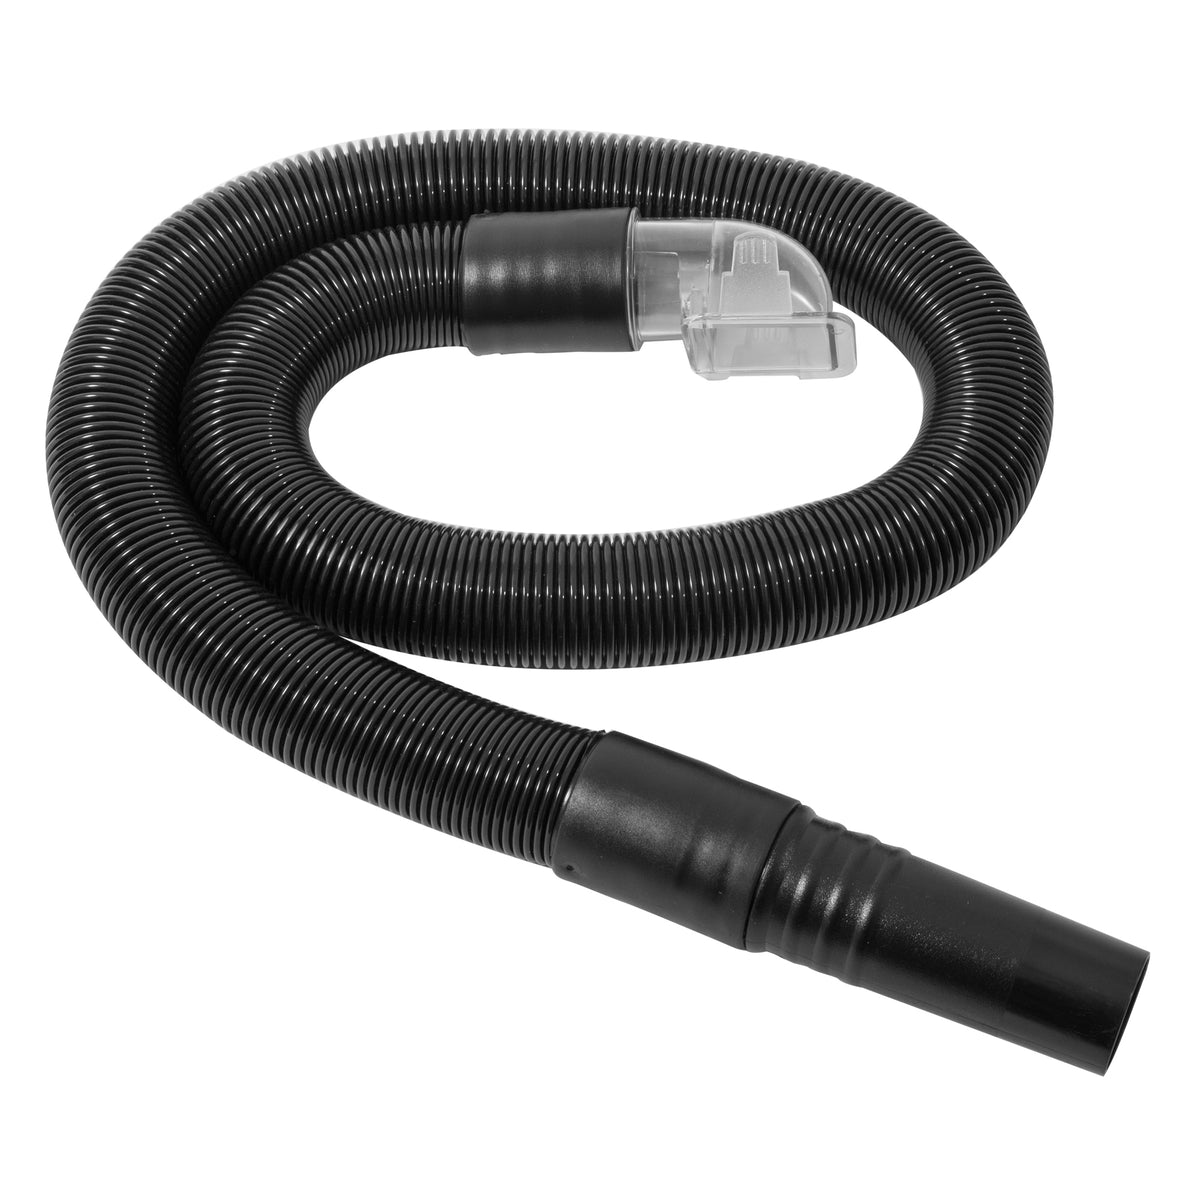 Stretch Hose Sanitaire Assembly 618654 – Commercial